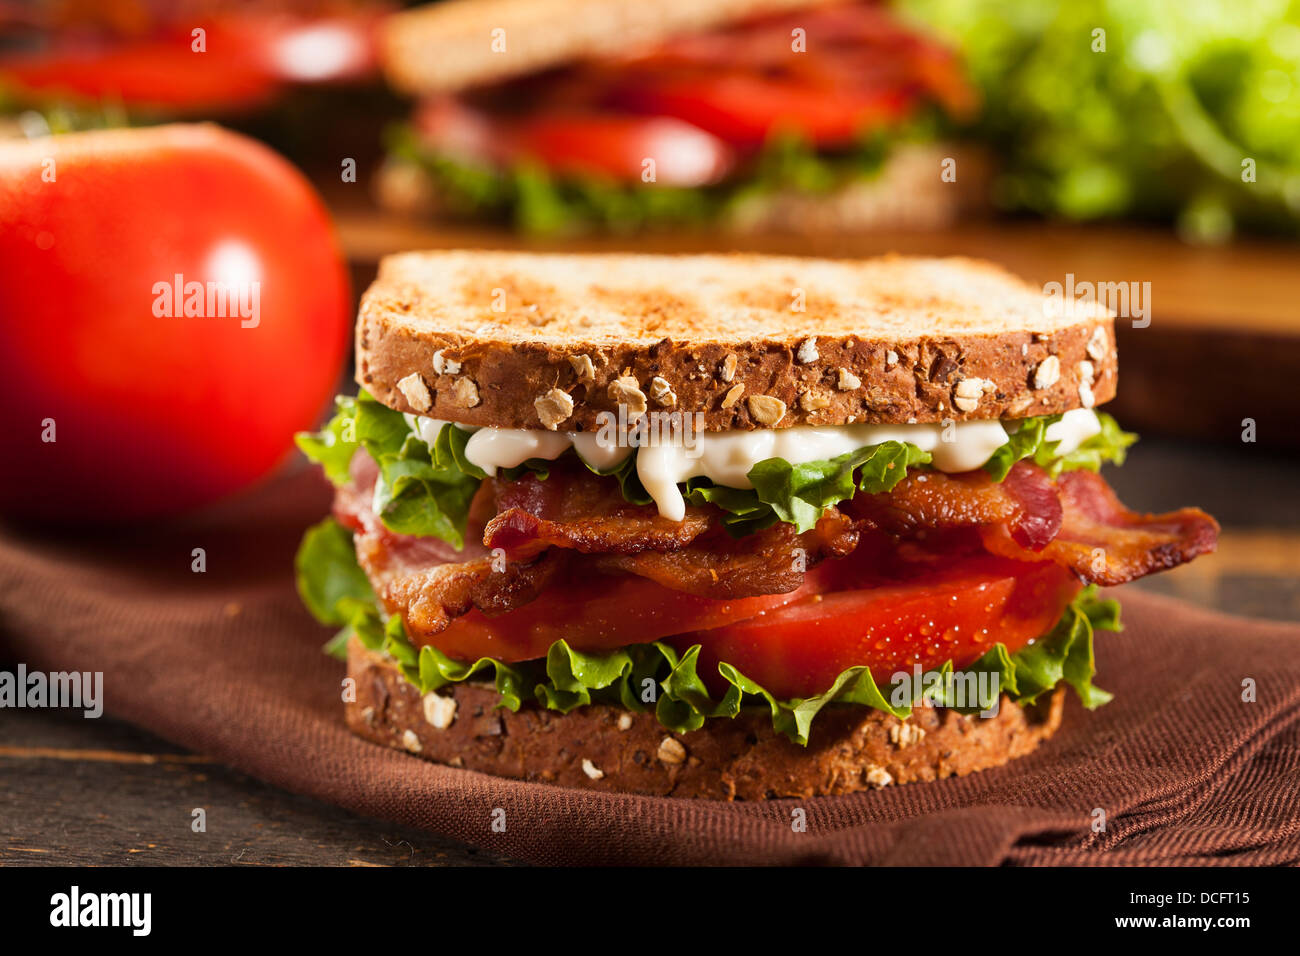 Fresh Homemade BLT Sandwich with Bacon Lettuce and Tomato Stock Photo